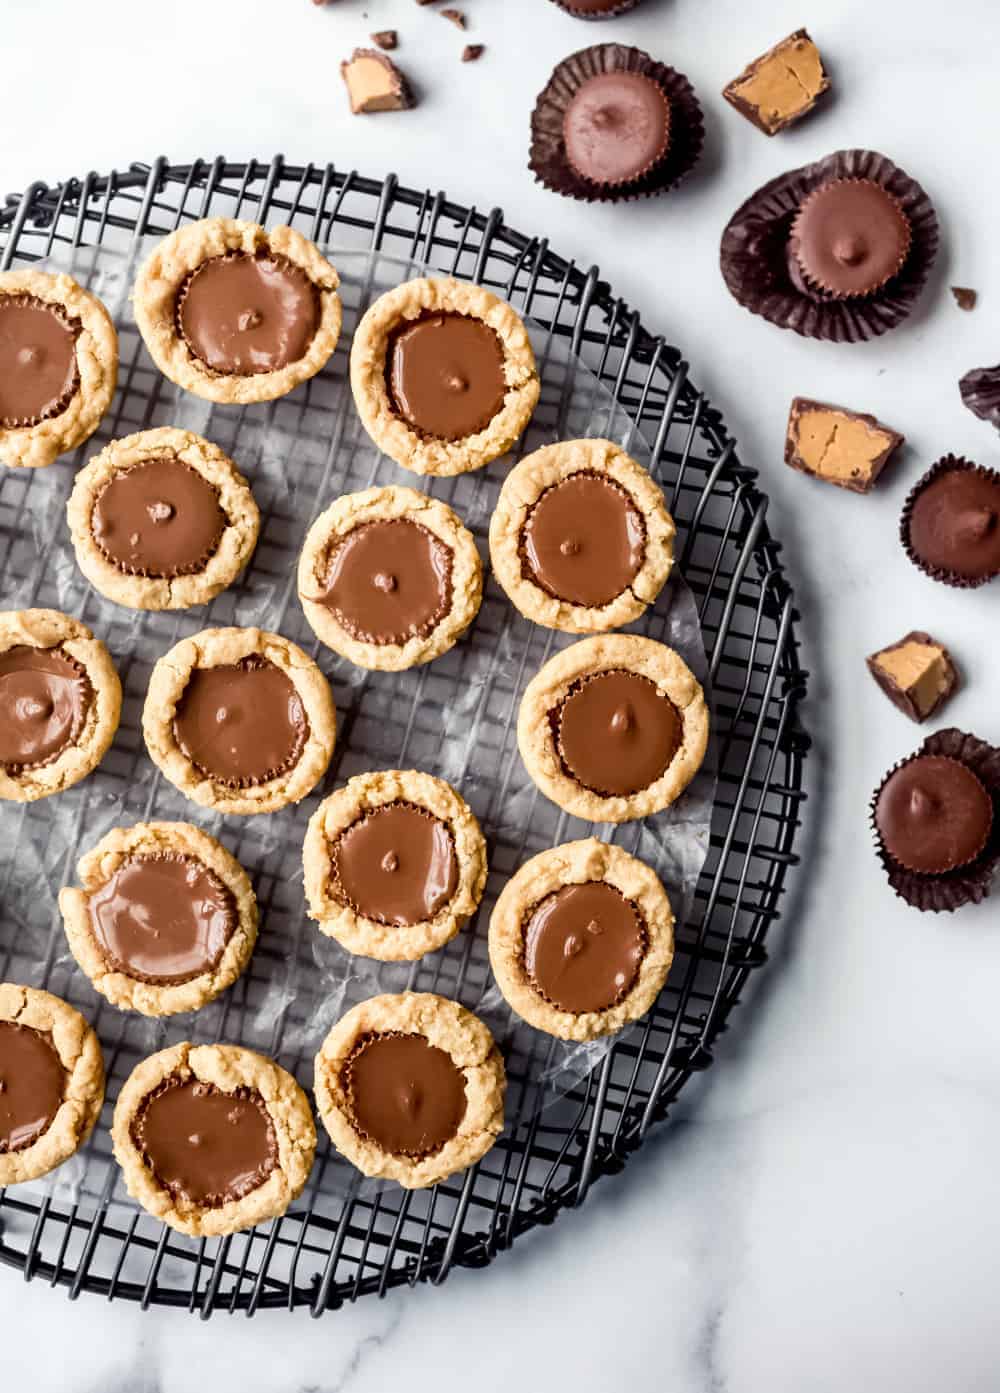 Overhead view of peanut butter cup cookies arranged on a circular cooling rack